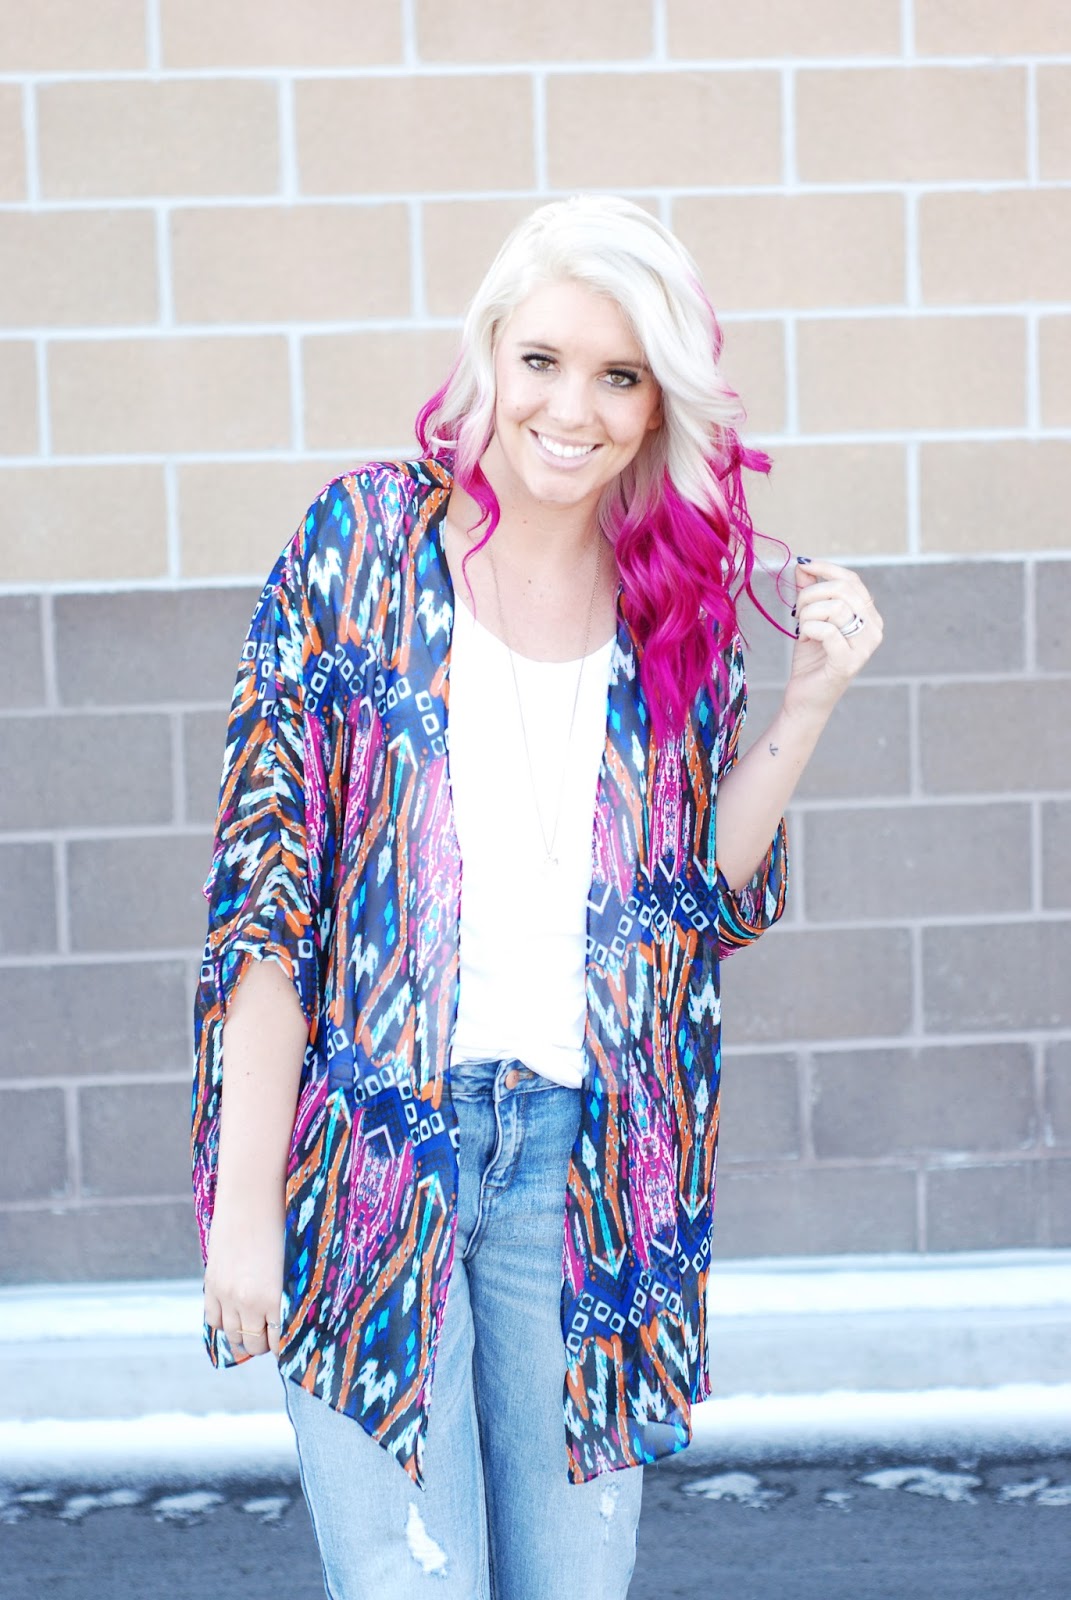 HOW TO STYLE KIMONOS FEATURING CORAL REEF SWIM | The Red Closet Diary